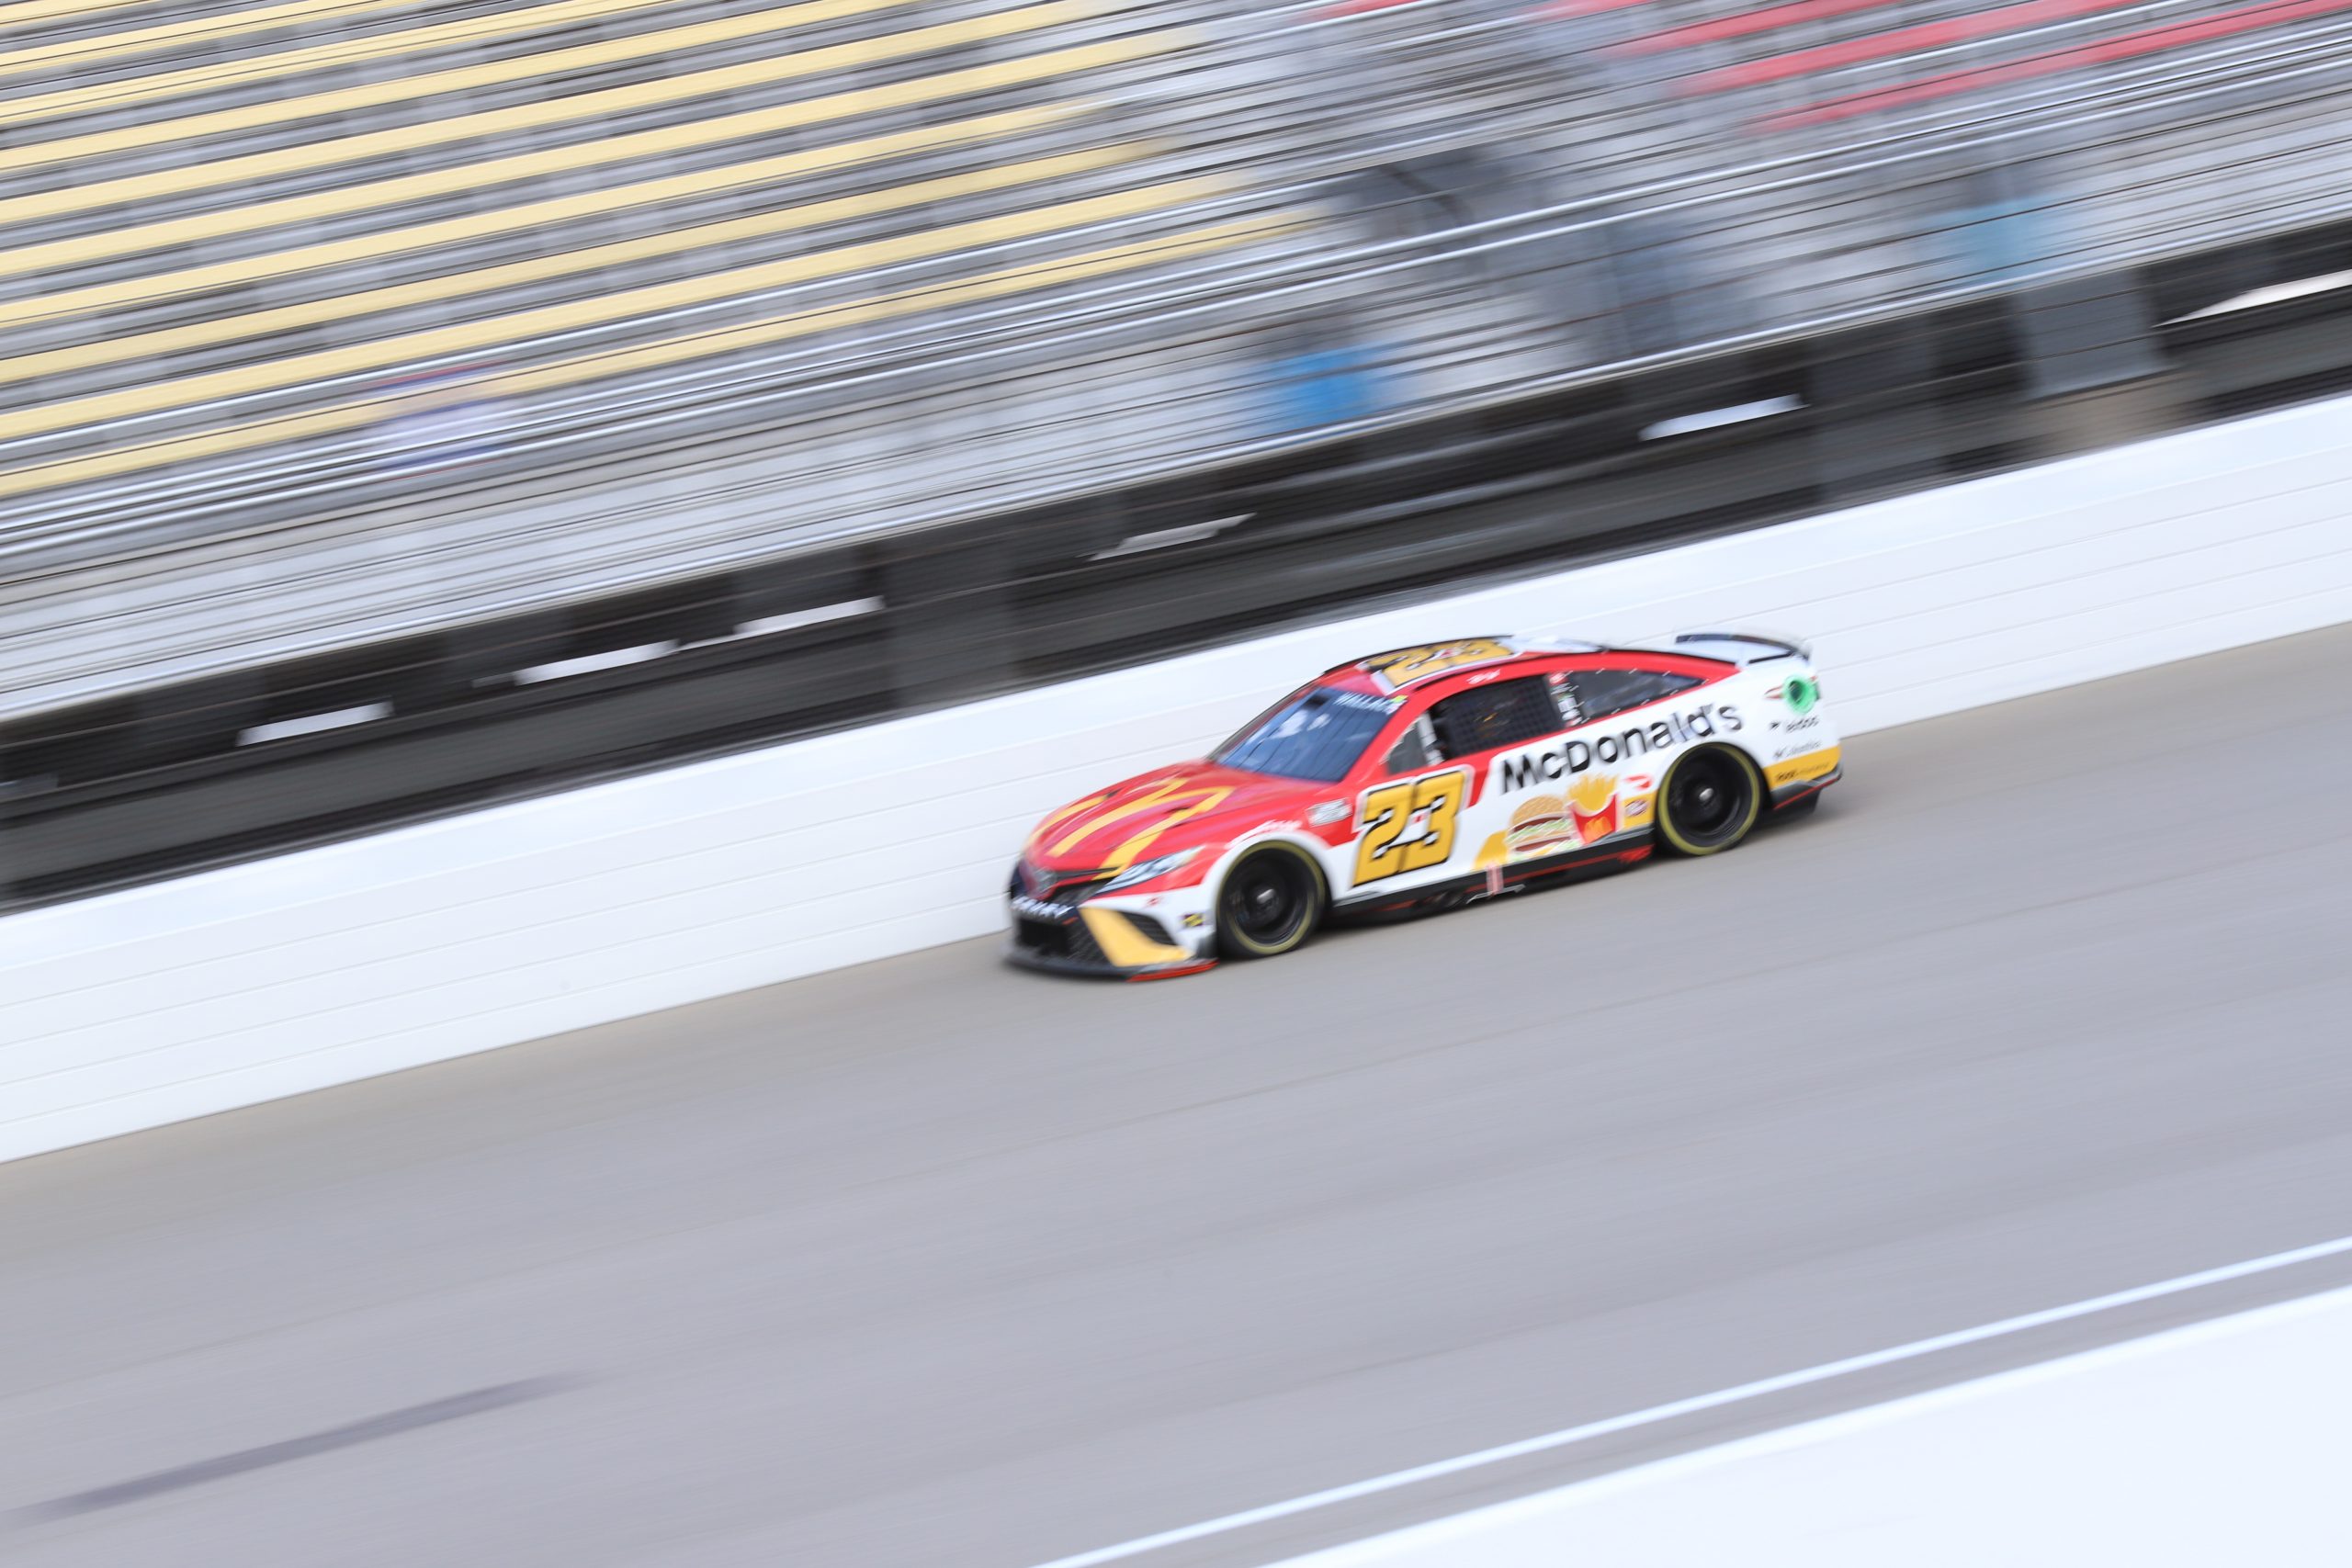 As can be seen, Wallace applied the spurs to his No. 23 McDonald's Toyota Camry in smooth fashion. (Photo: Dylan Nadwodny | The Podium Finish)